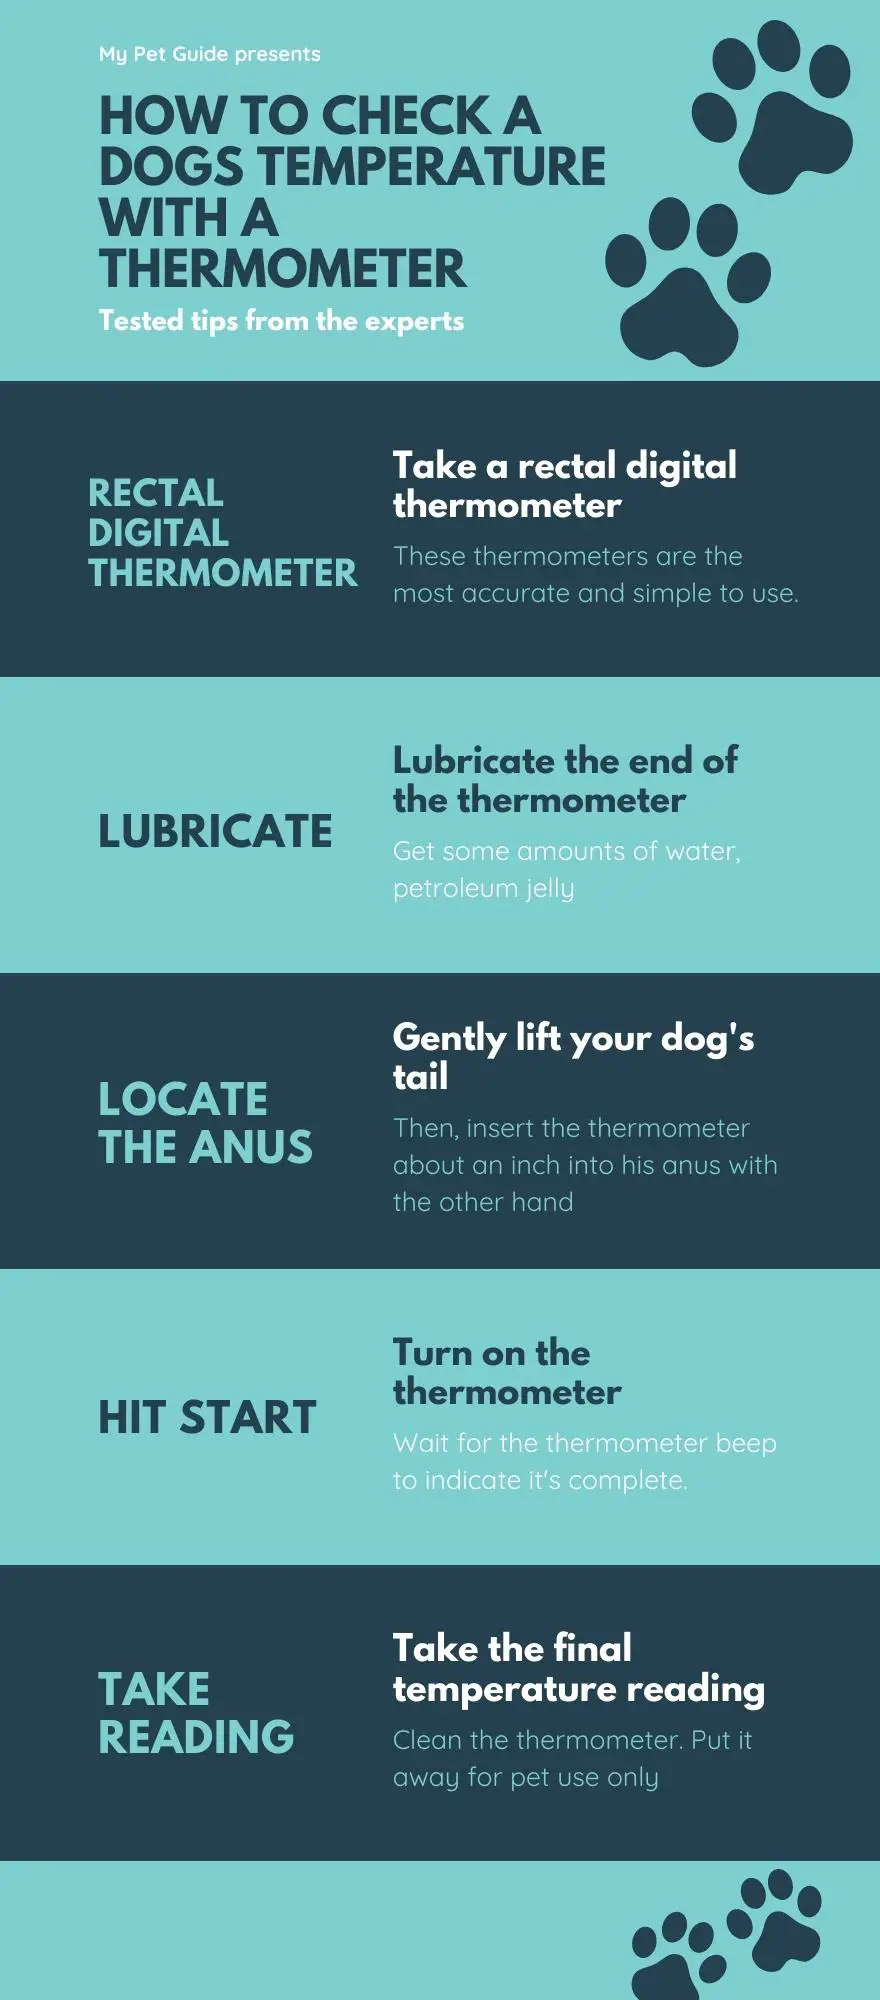 How To Check a Dogs Temperature with a Thermometer